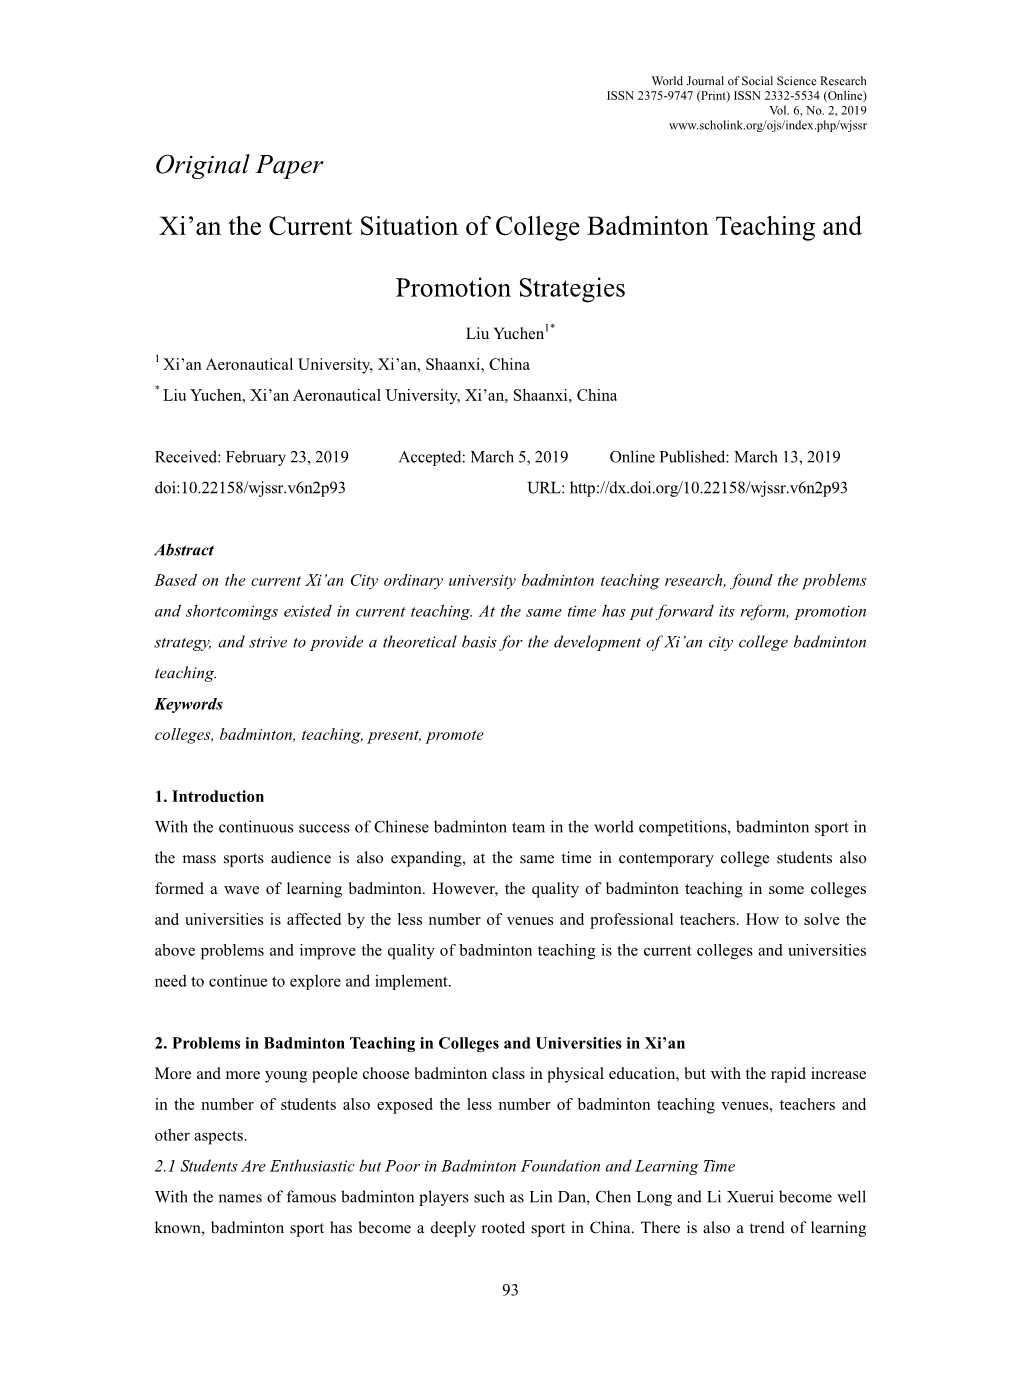 Original Paper Xi'an the Current Situation of College Badminton Teaching and Promotion Strategies